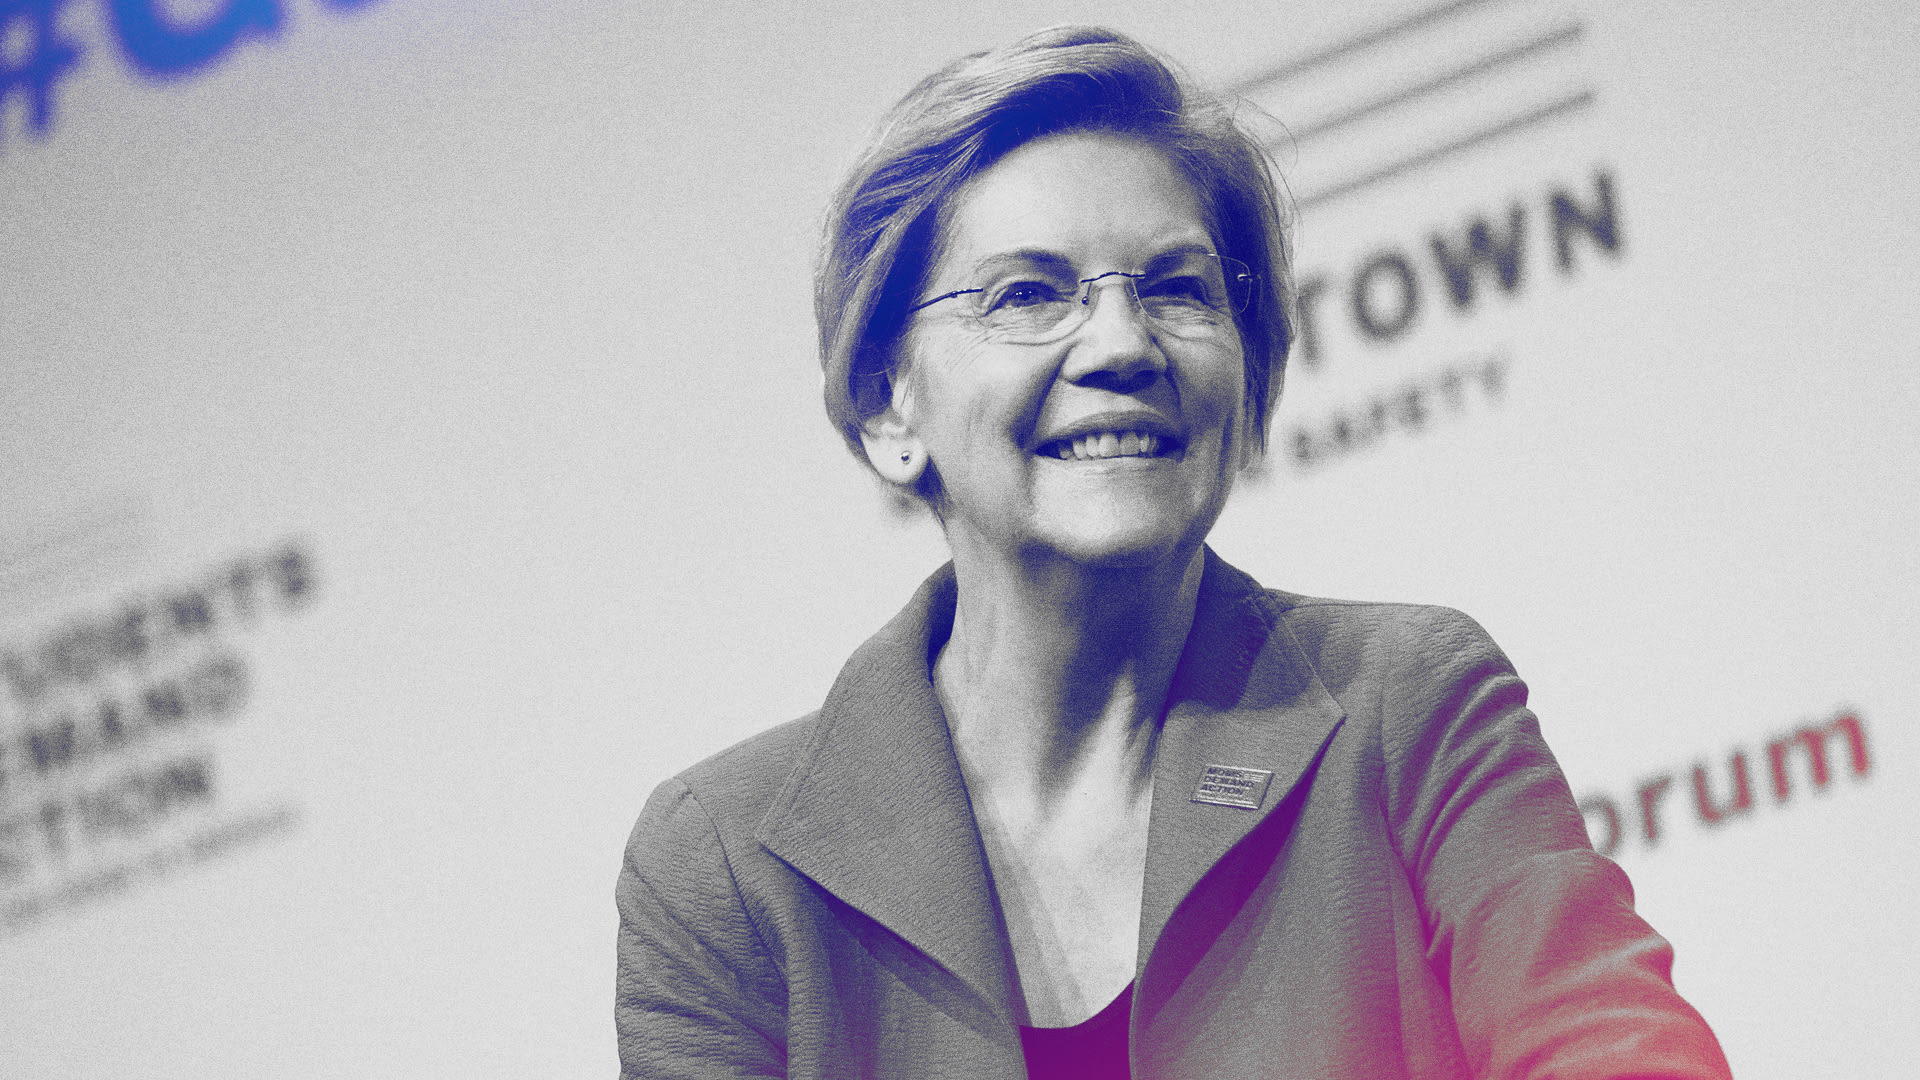 Bernie Sanders supporters are mad at Working Families Party over Elizabeth Warren endorsement